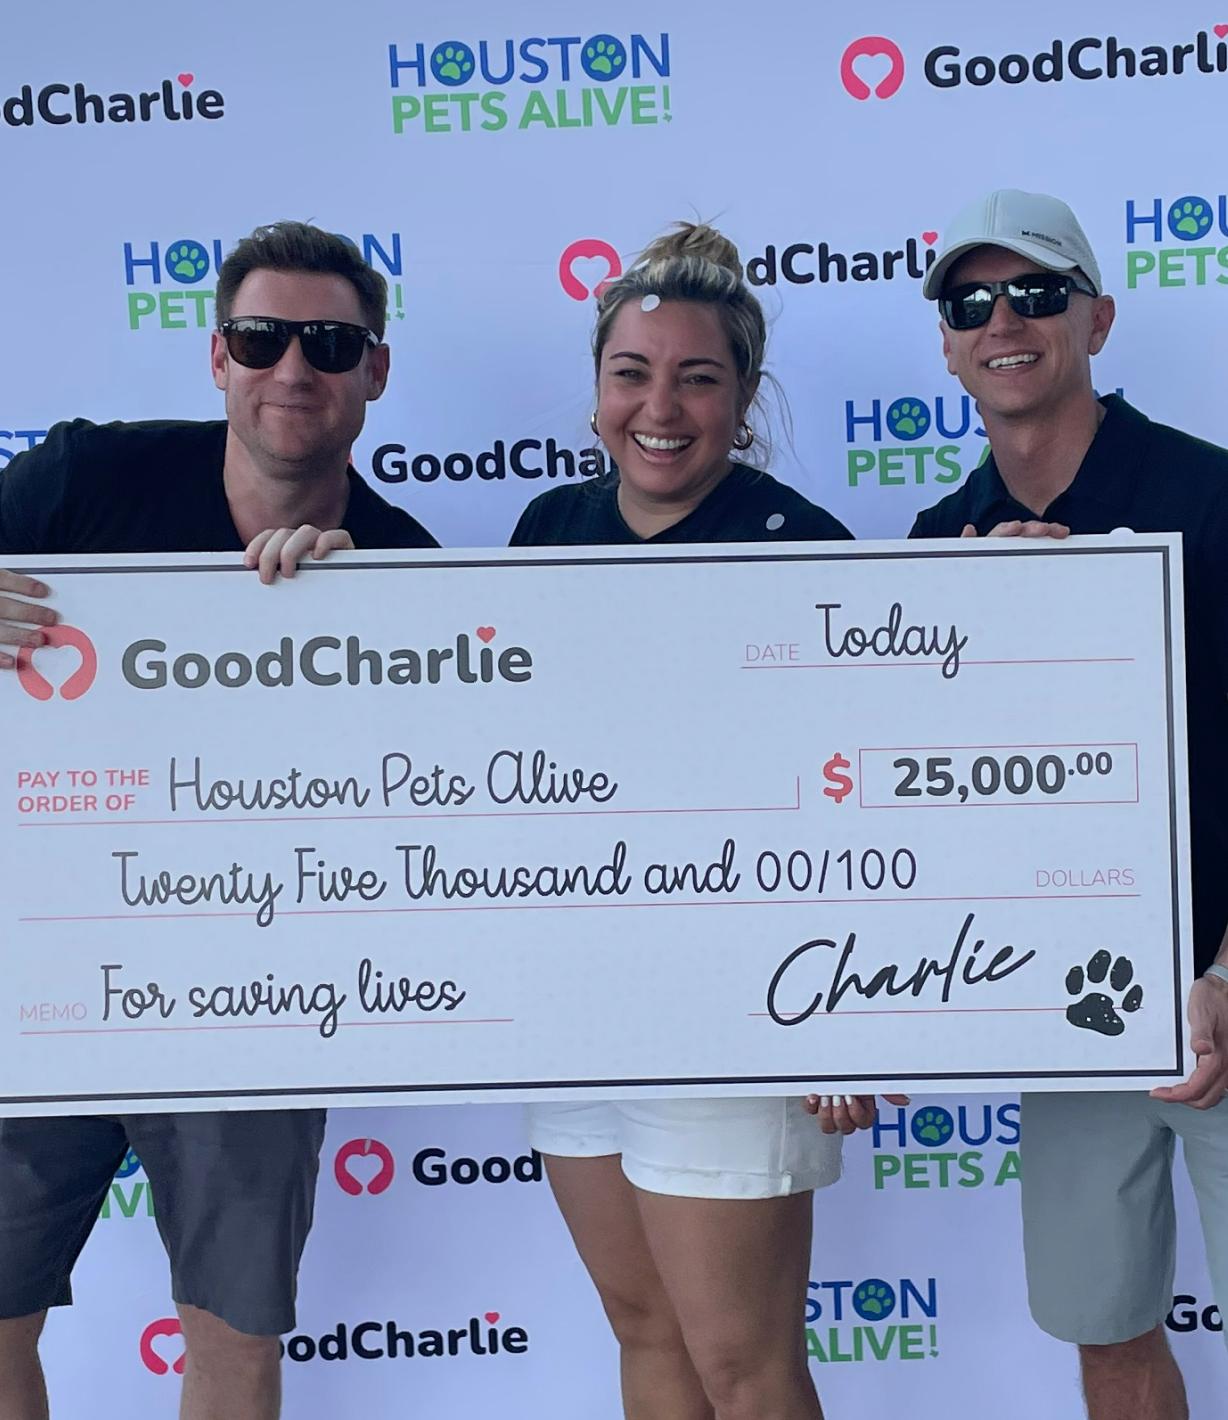 Daryl and Ken, cofounders of GoodCharlie, together with a woman, hold a giant dummy cheque of $25,000 issued to Houston Pets Alive organisation.